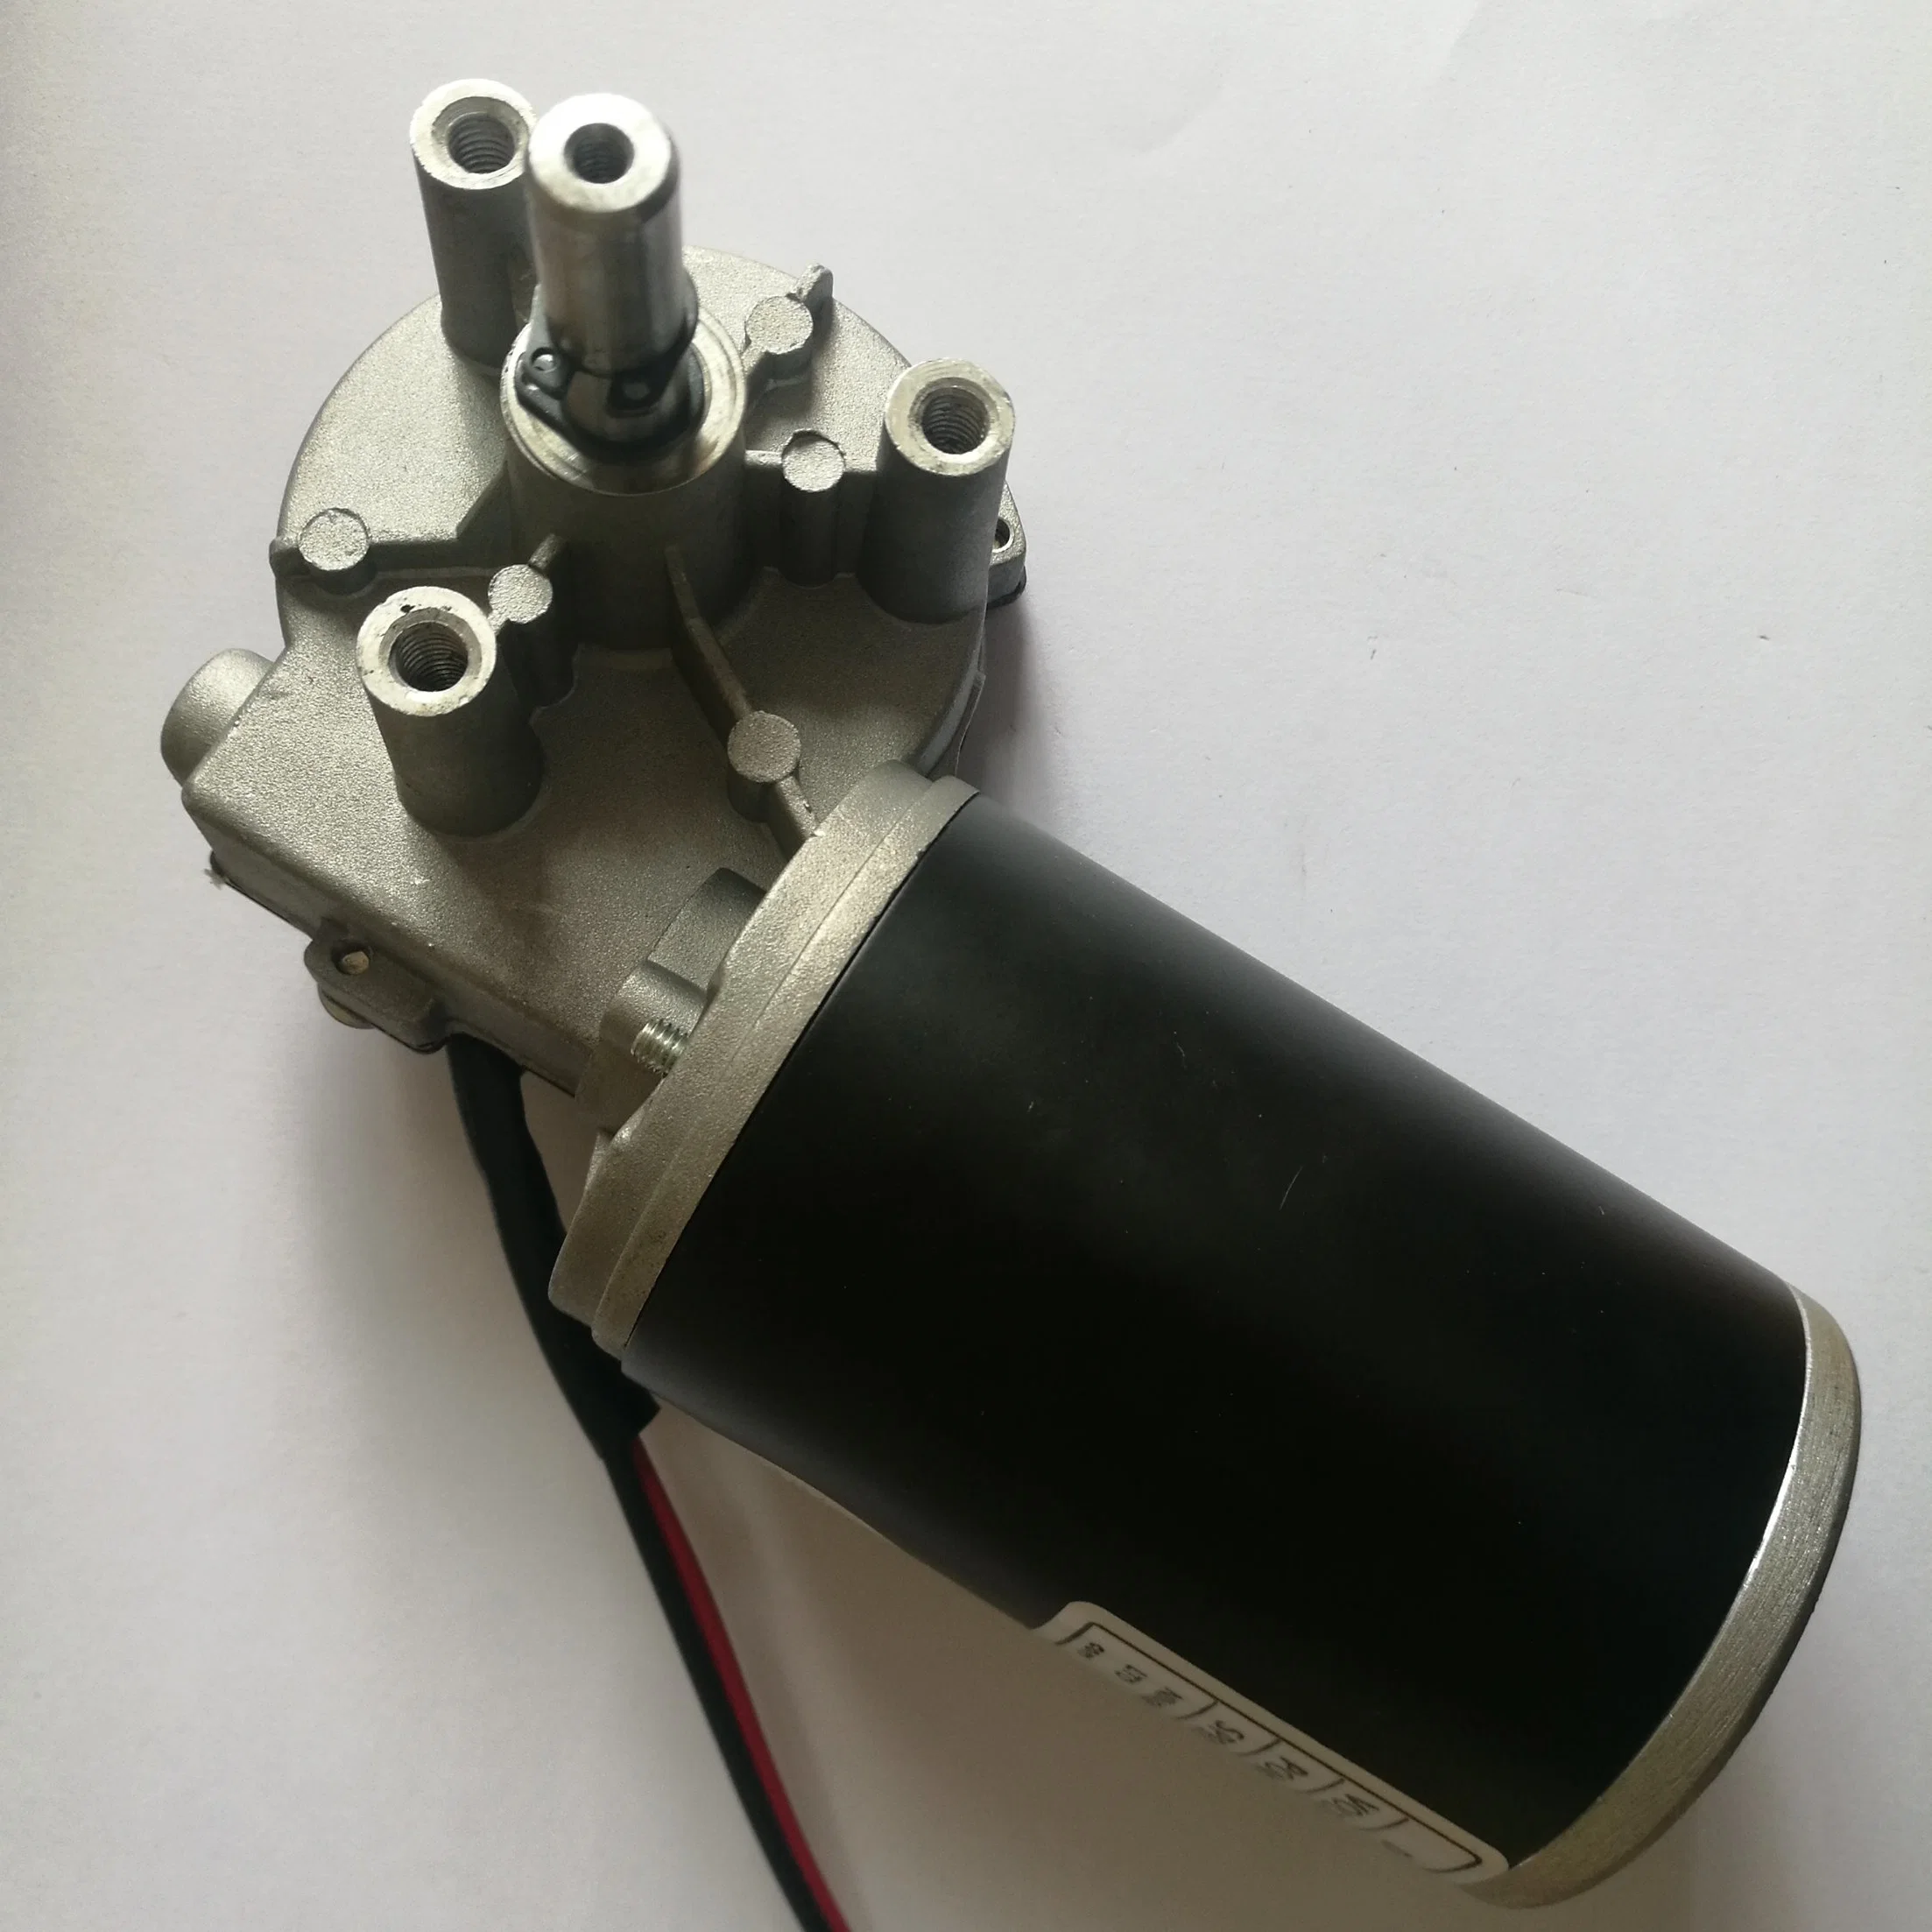 DC 12V 24V Worm Geared Motor for Seniautomatic Wire Feeders High Speed Low Noise Long Lifespan